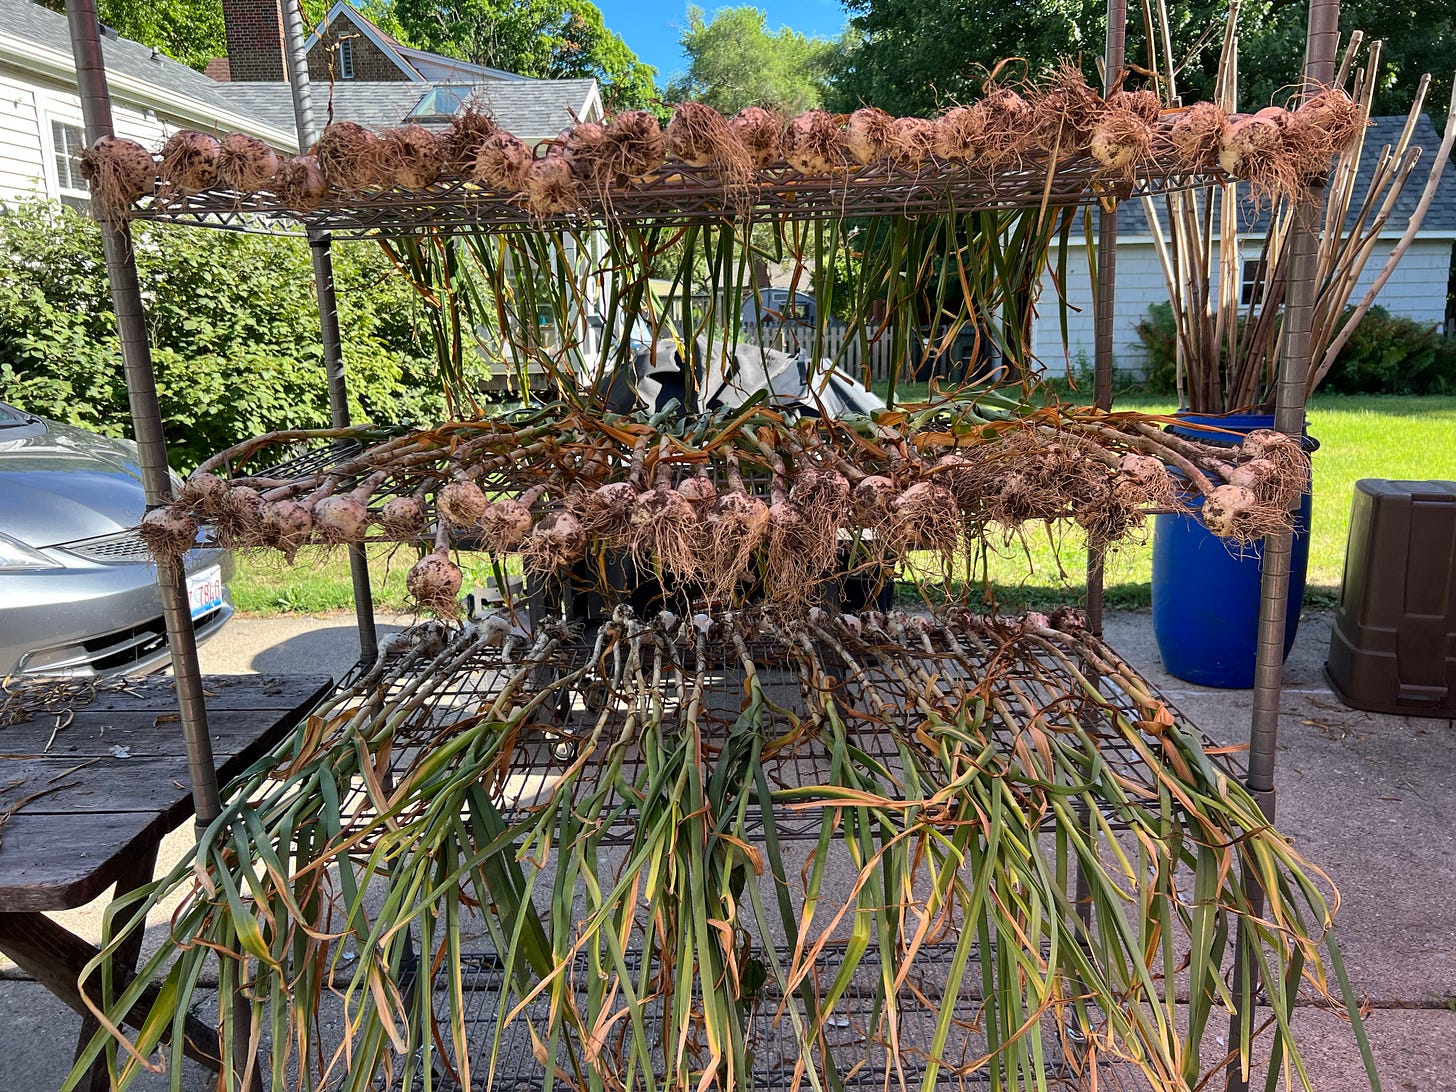 Several rows of freshly harvested garlic on wire shelving in the sunshine